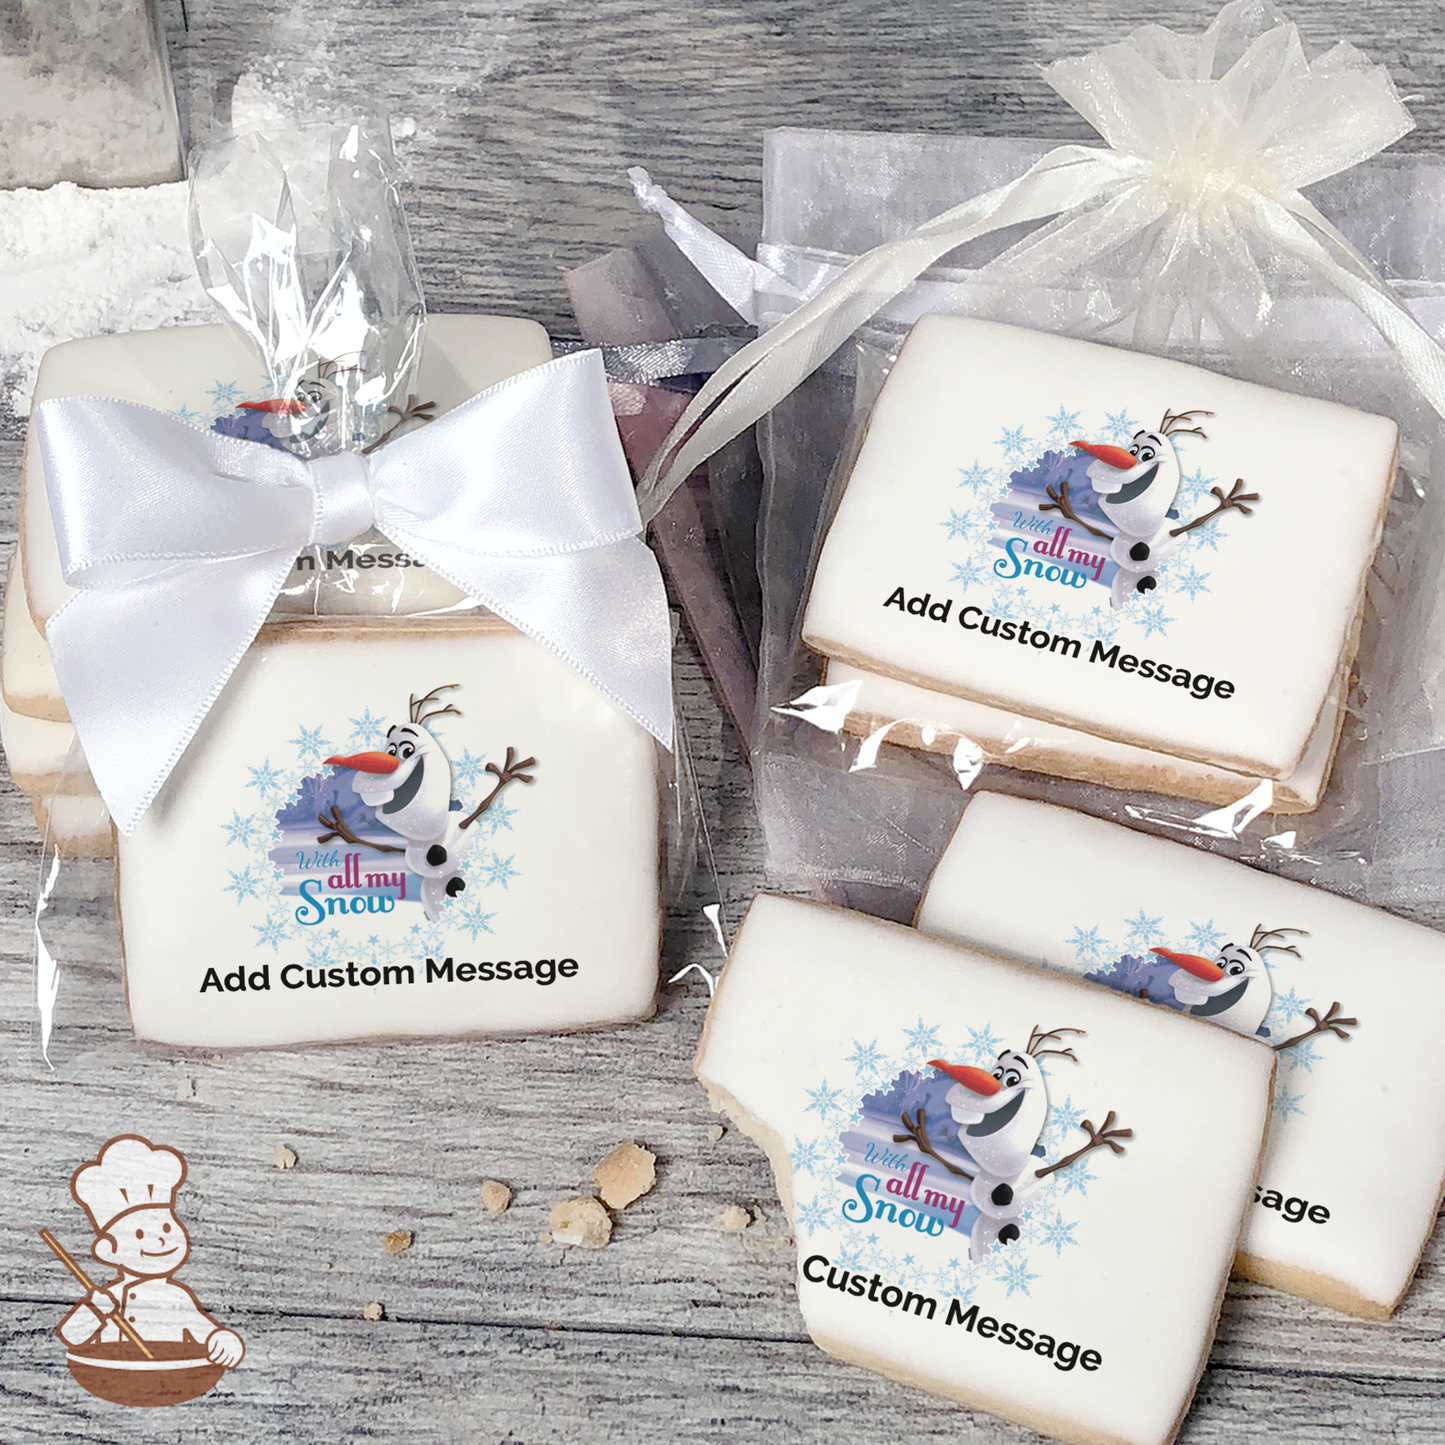 Frozen Olaf With All My Snow Custom Message Cookies (Rectangle)